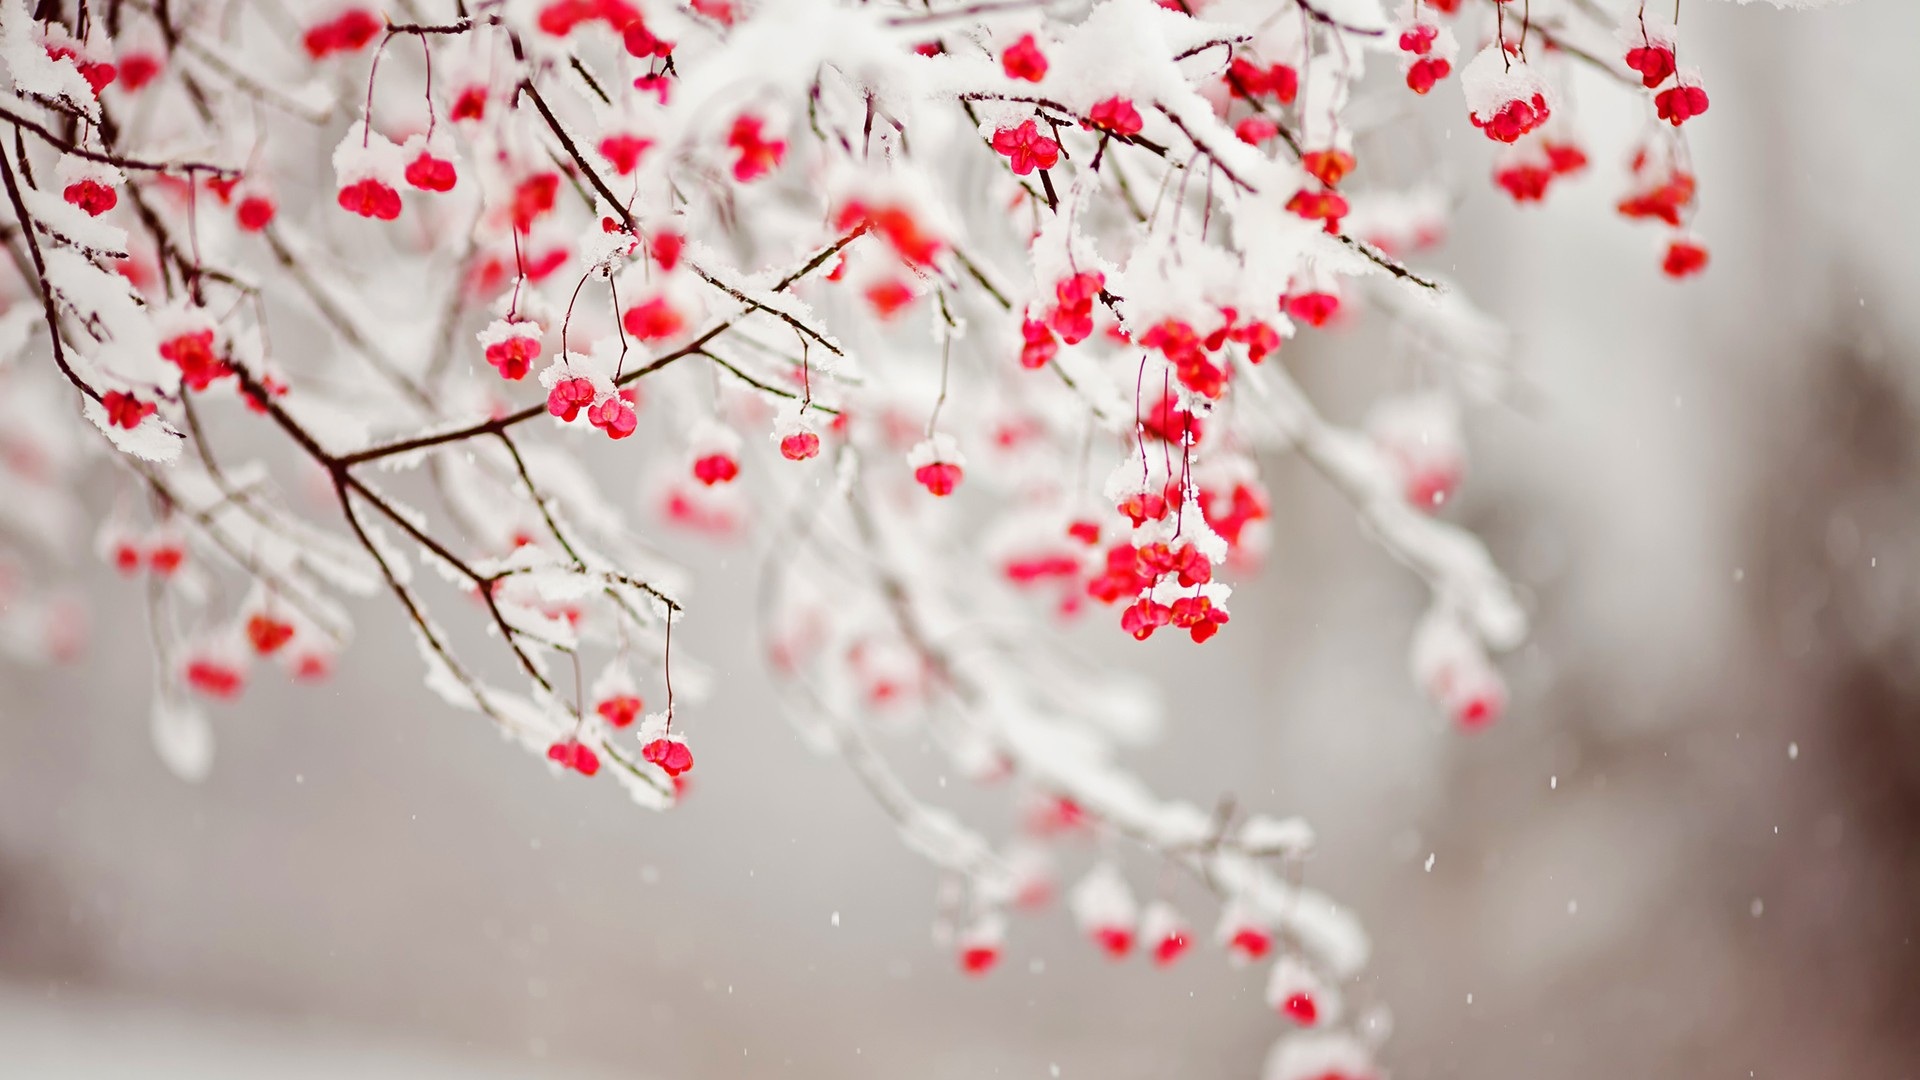 snow and red